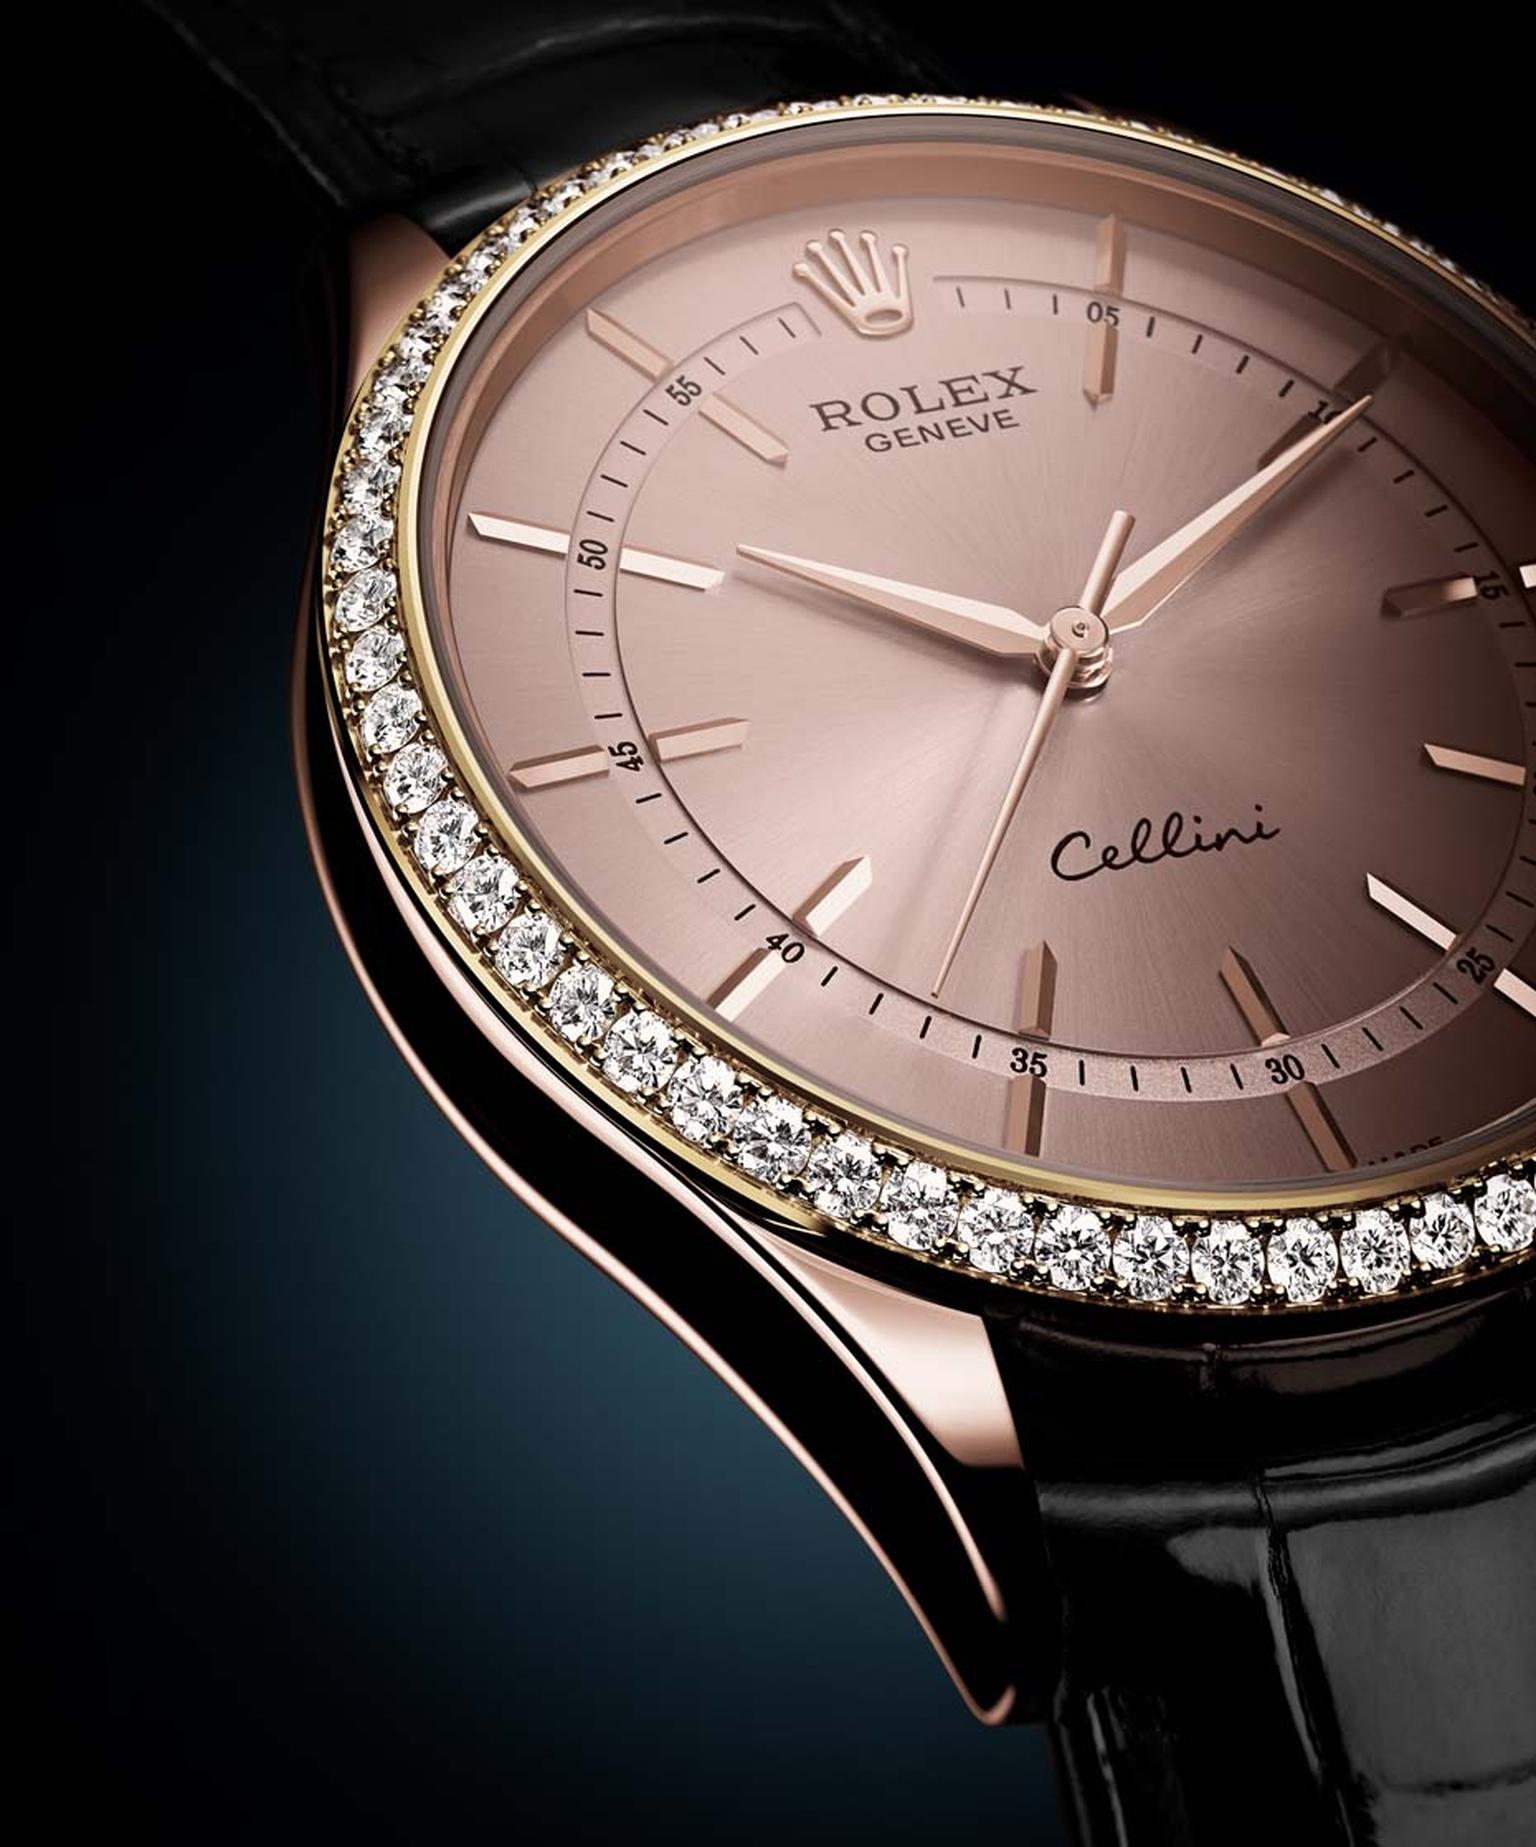 Rolex_Cellini Timeless collection_Rose gold case and dial diamonds black alligator strap.jpg